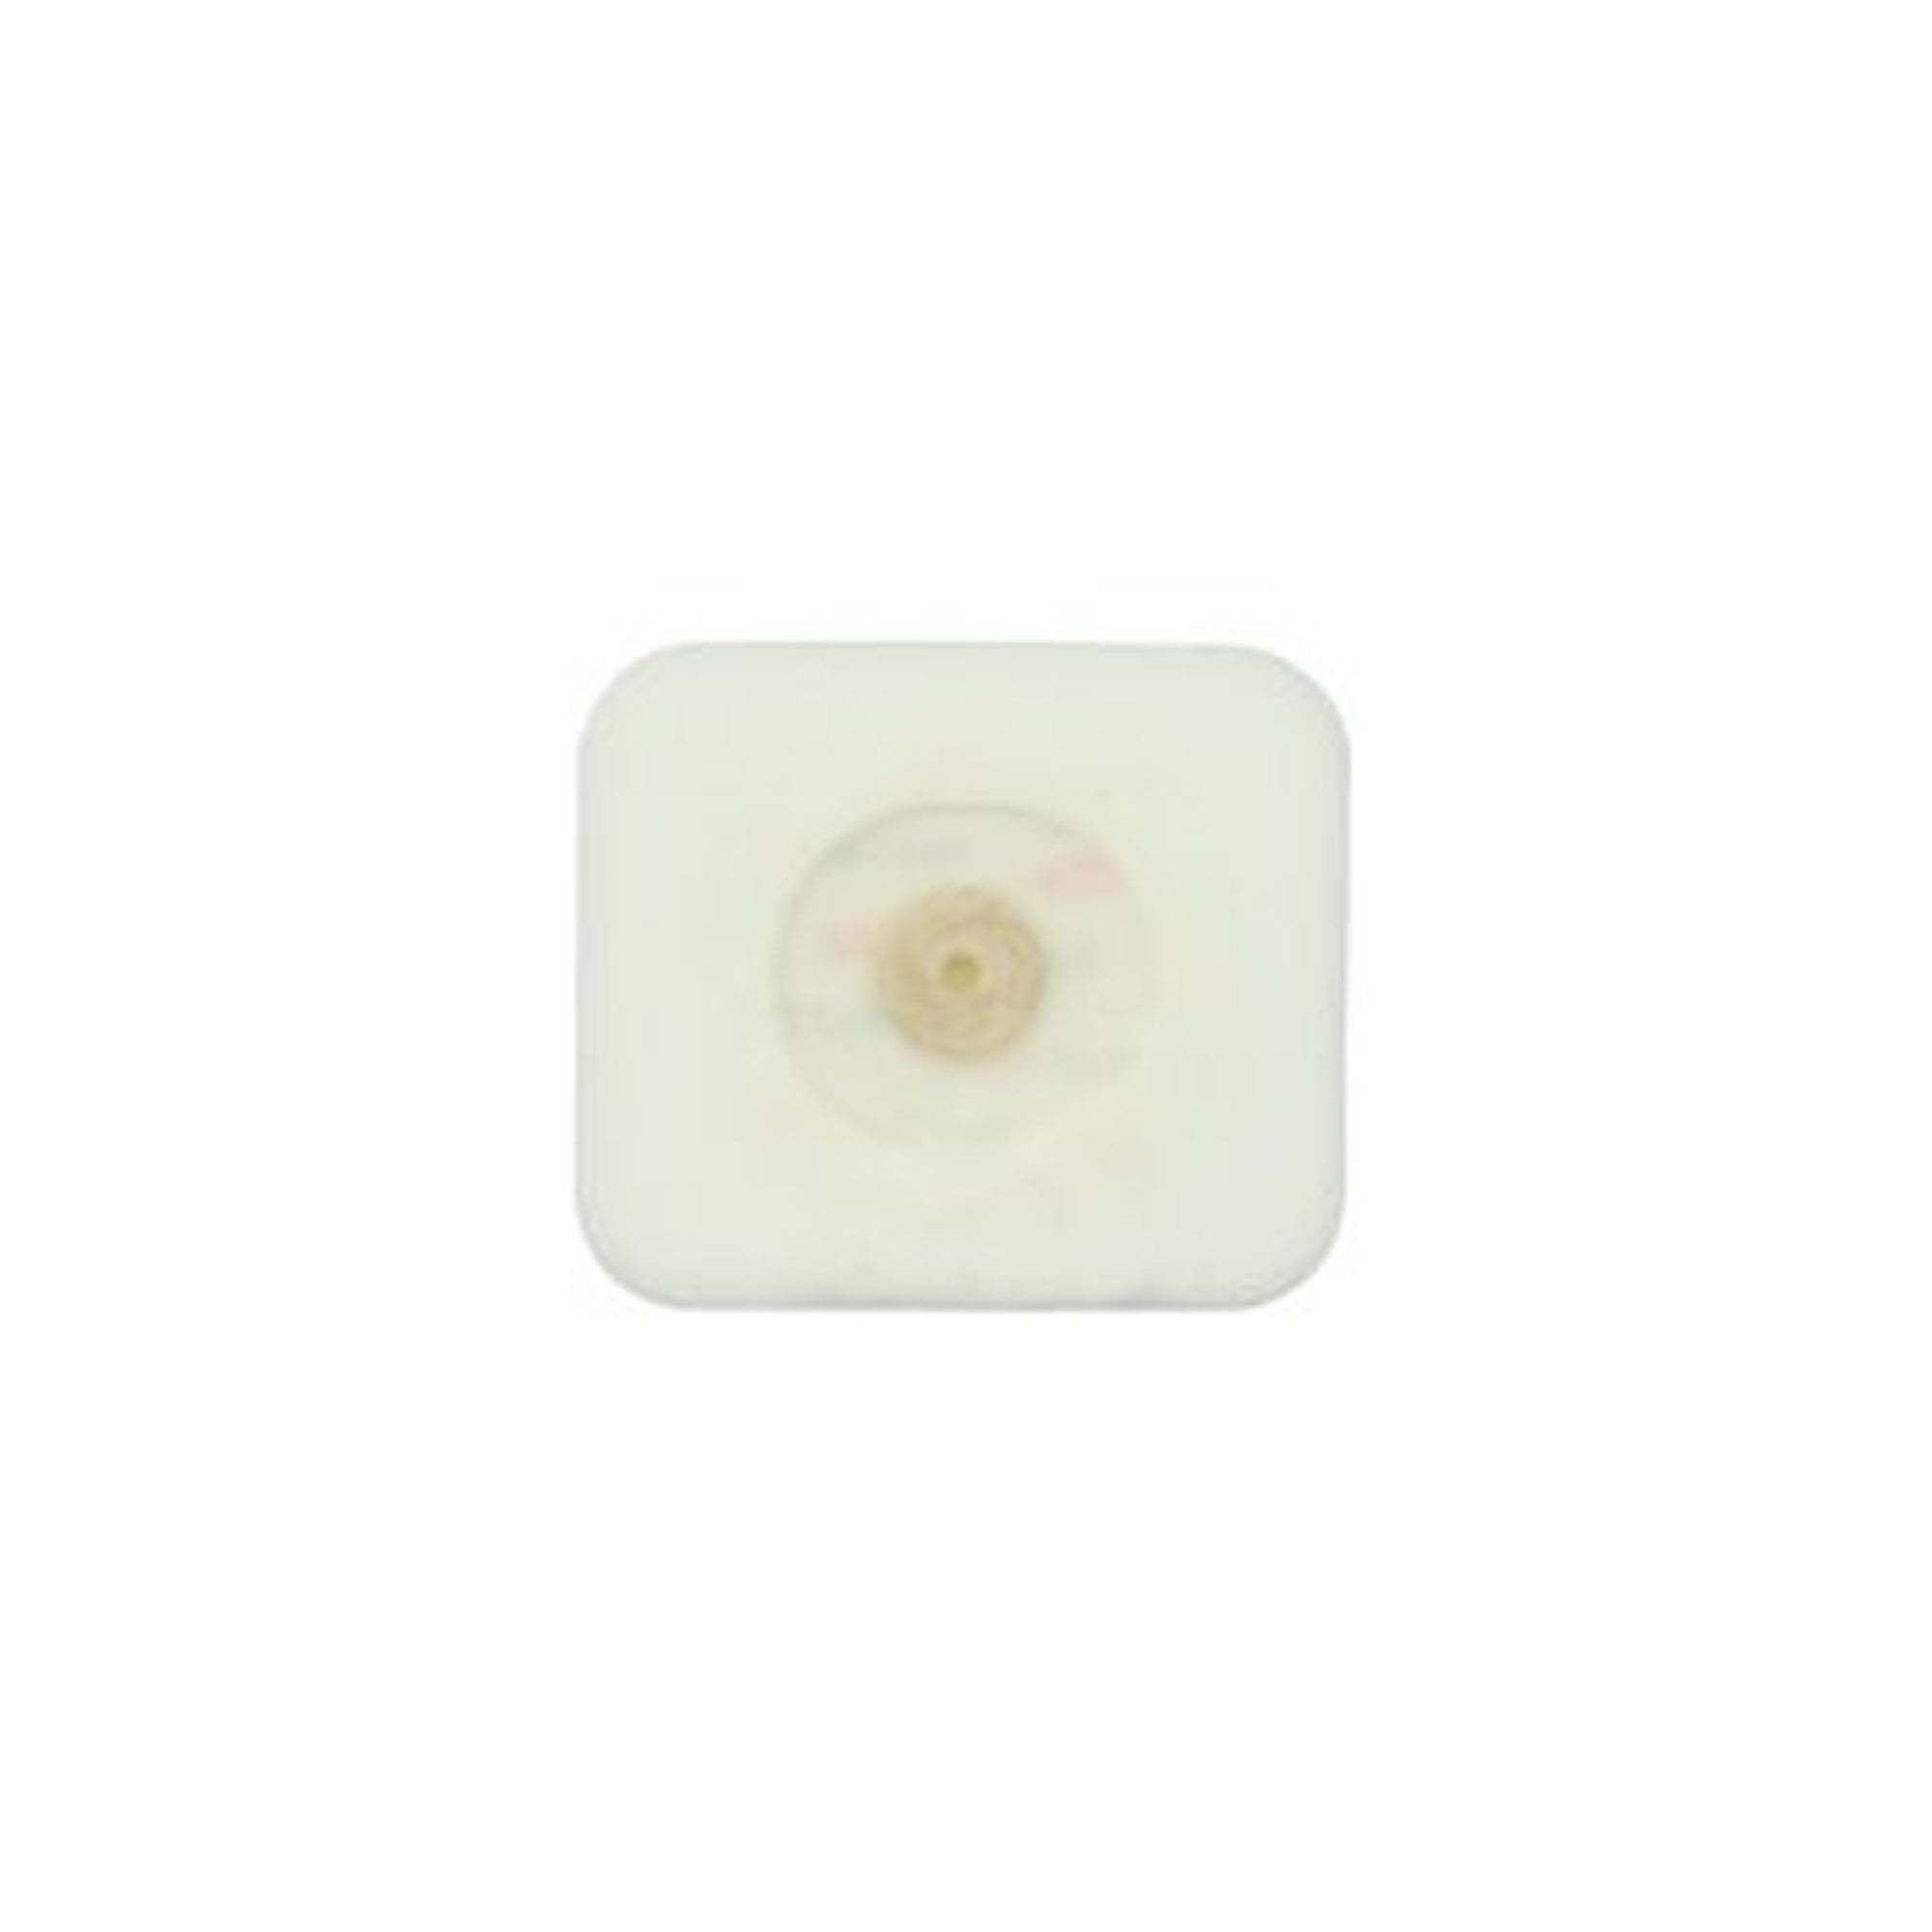 3M Healthcare ECG Monitoring Electrode - Foam Backing, Non-Radiolucent, Snap Connector